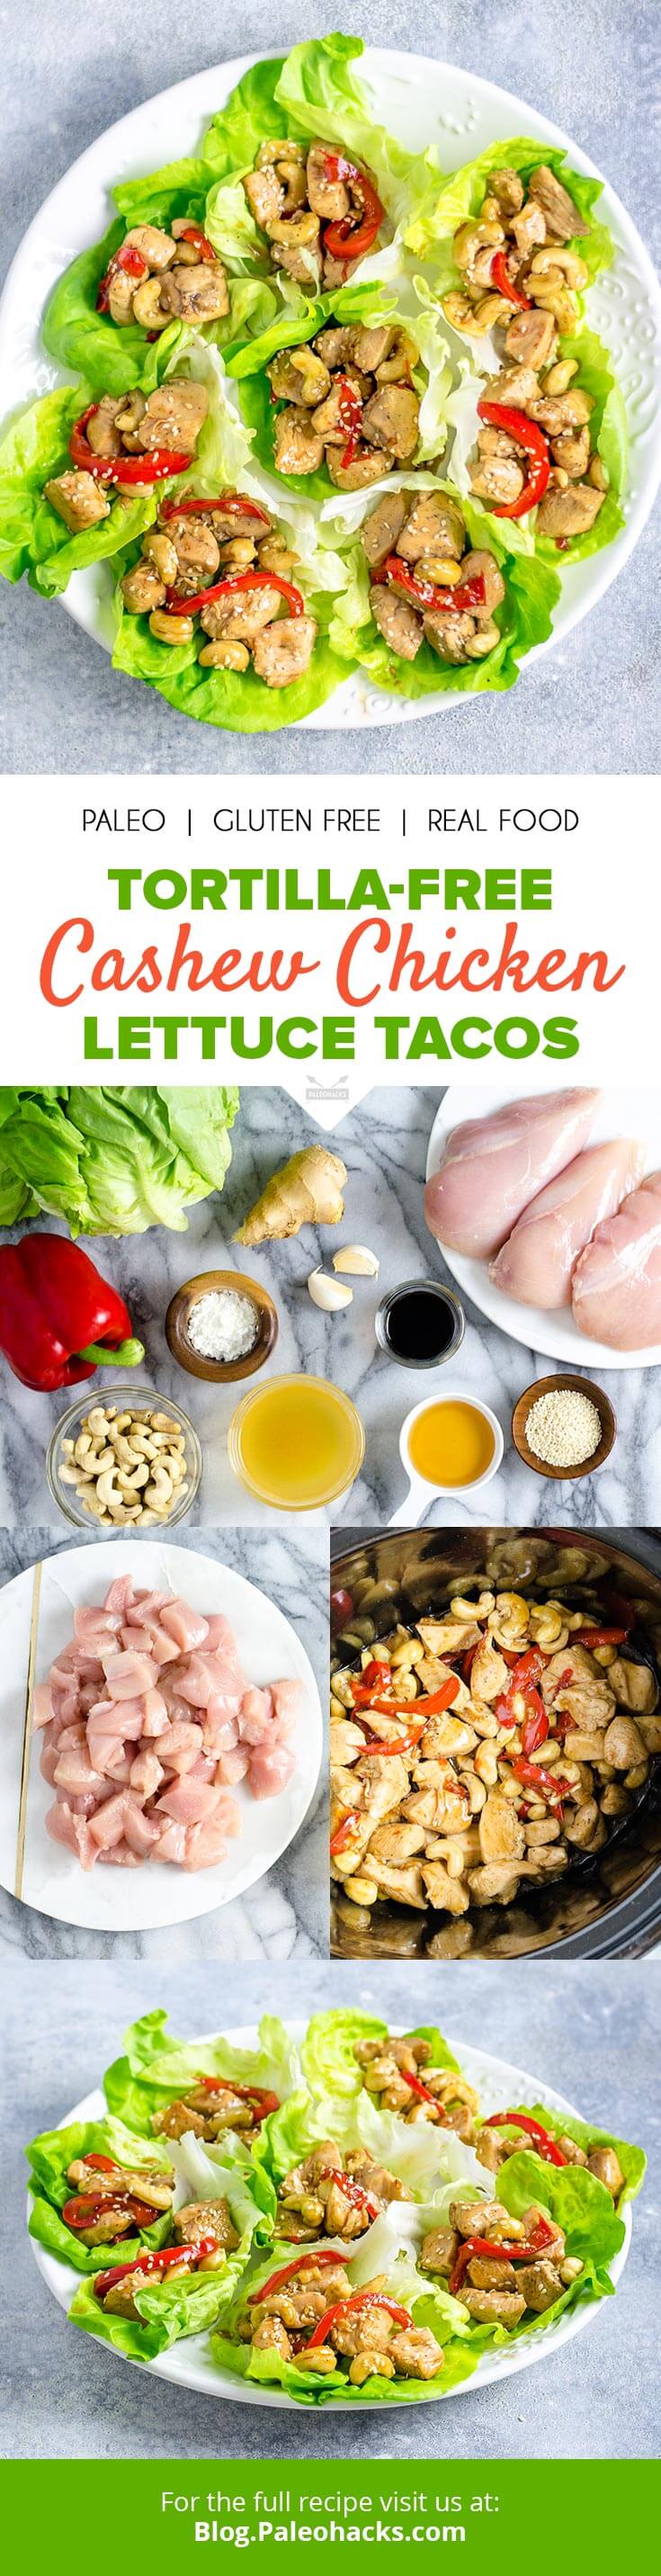 A healthy version of a Chinese takeout classic, these savory cashew chicken lettuce tacos make your slow cooker do all the work!